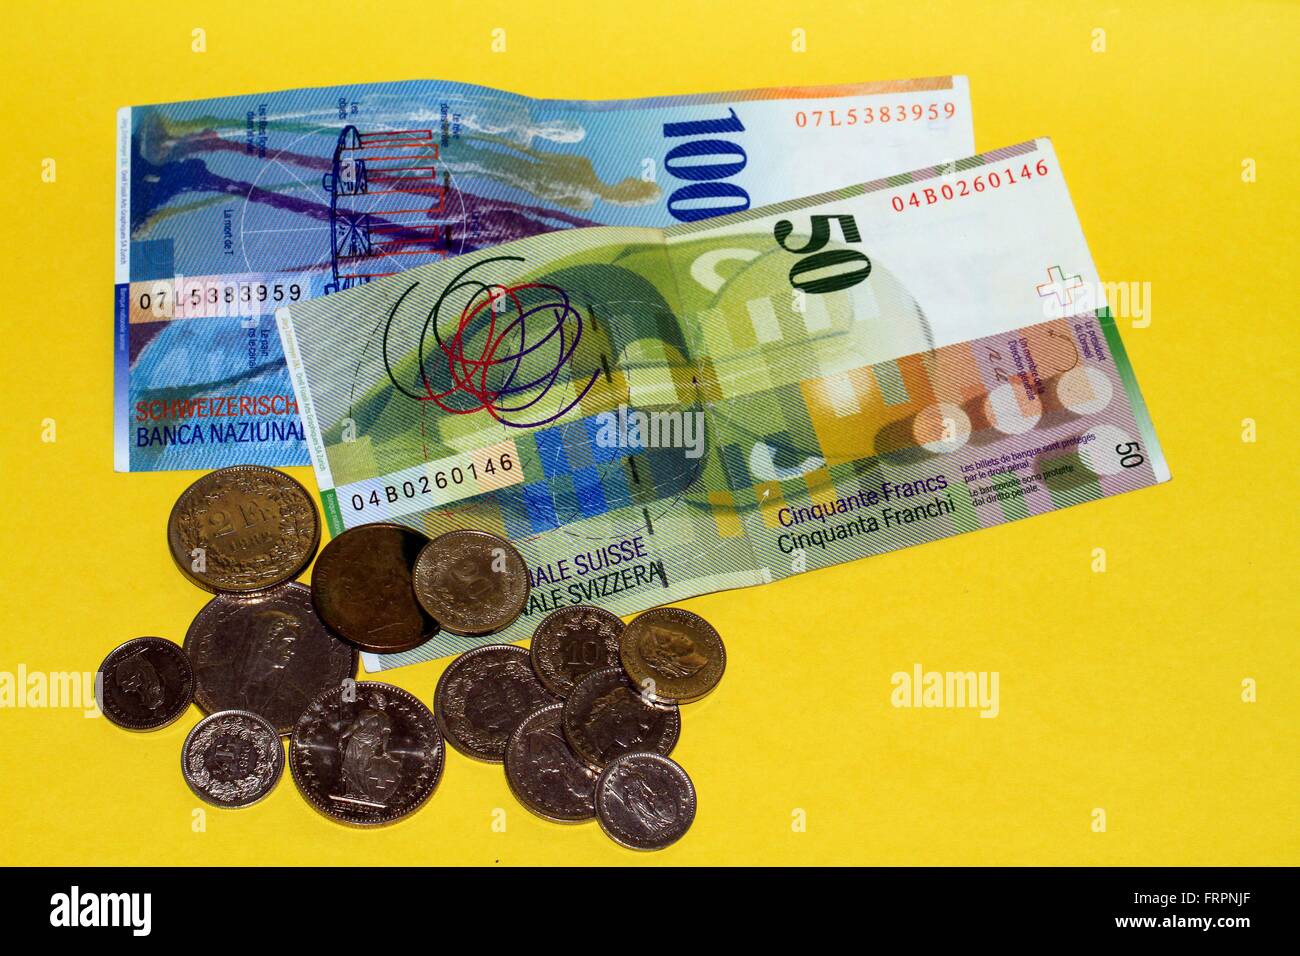 The Swiss franc is the currency of Switzerland and Liechtenstein. It is divided into 100 Rappen. Its ISO abbreviation is CHF, the currency symbol is Fr. For centime amounts is the abbreviation Rp. Switzerland, Europe Date: March 19, 2016 Date: March 19, 20 Stock Photo